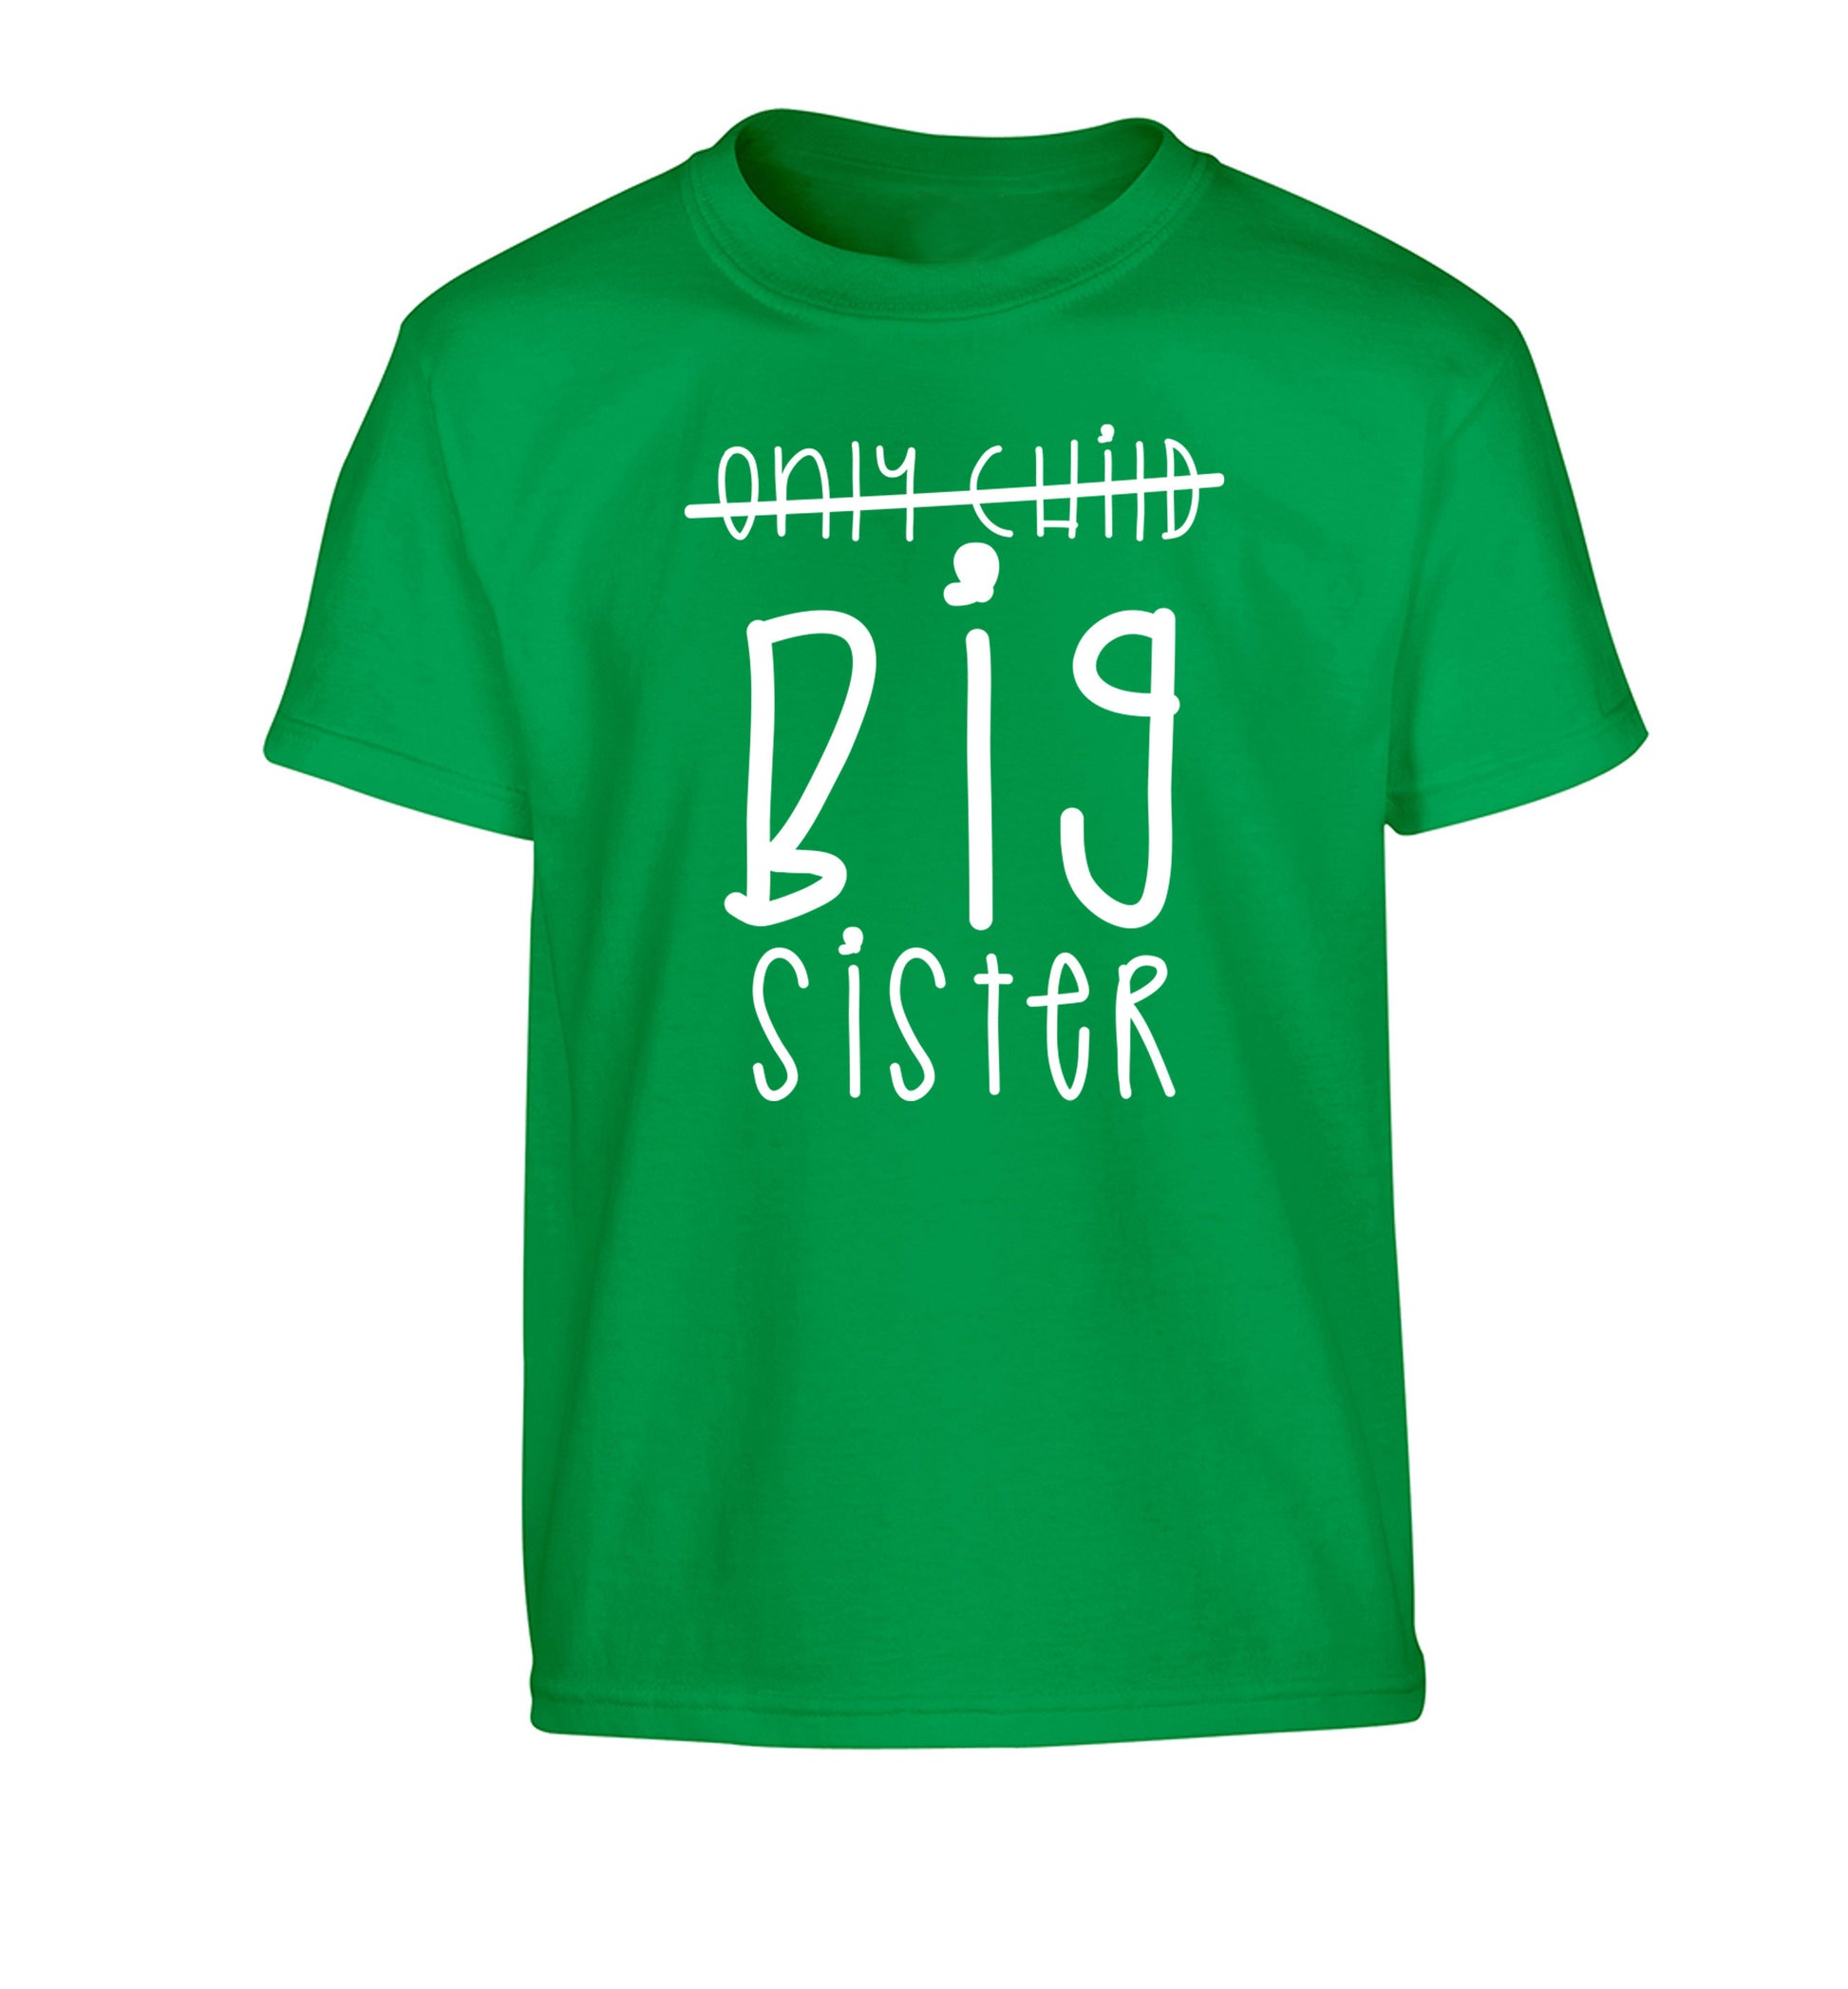 Only child big sister Children's green Tshirt 12-14 Years